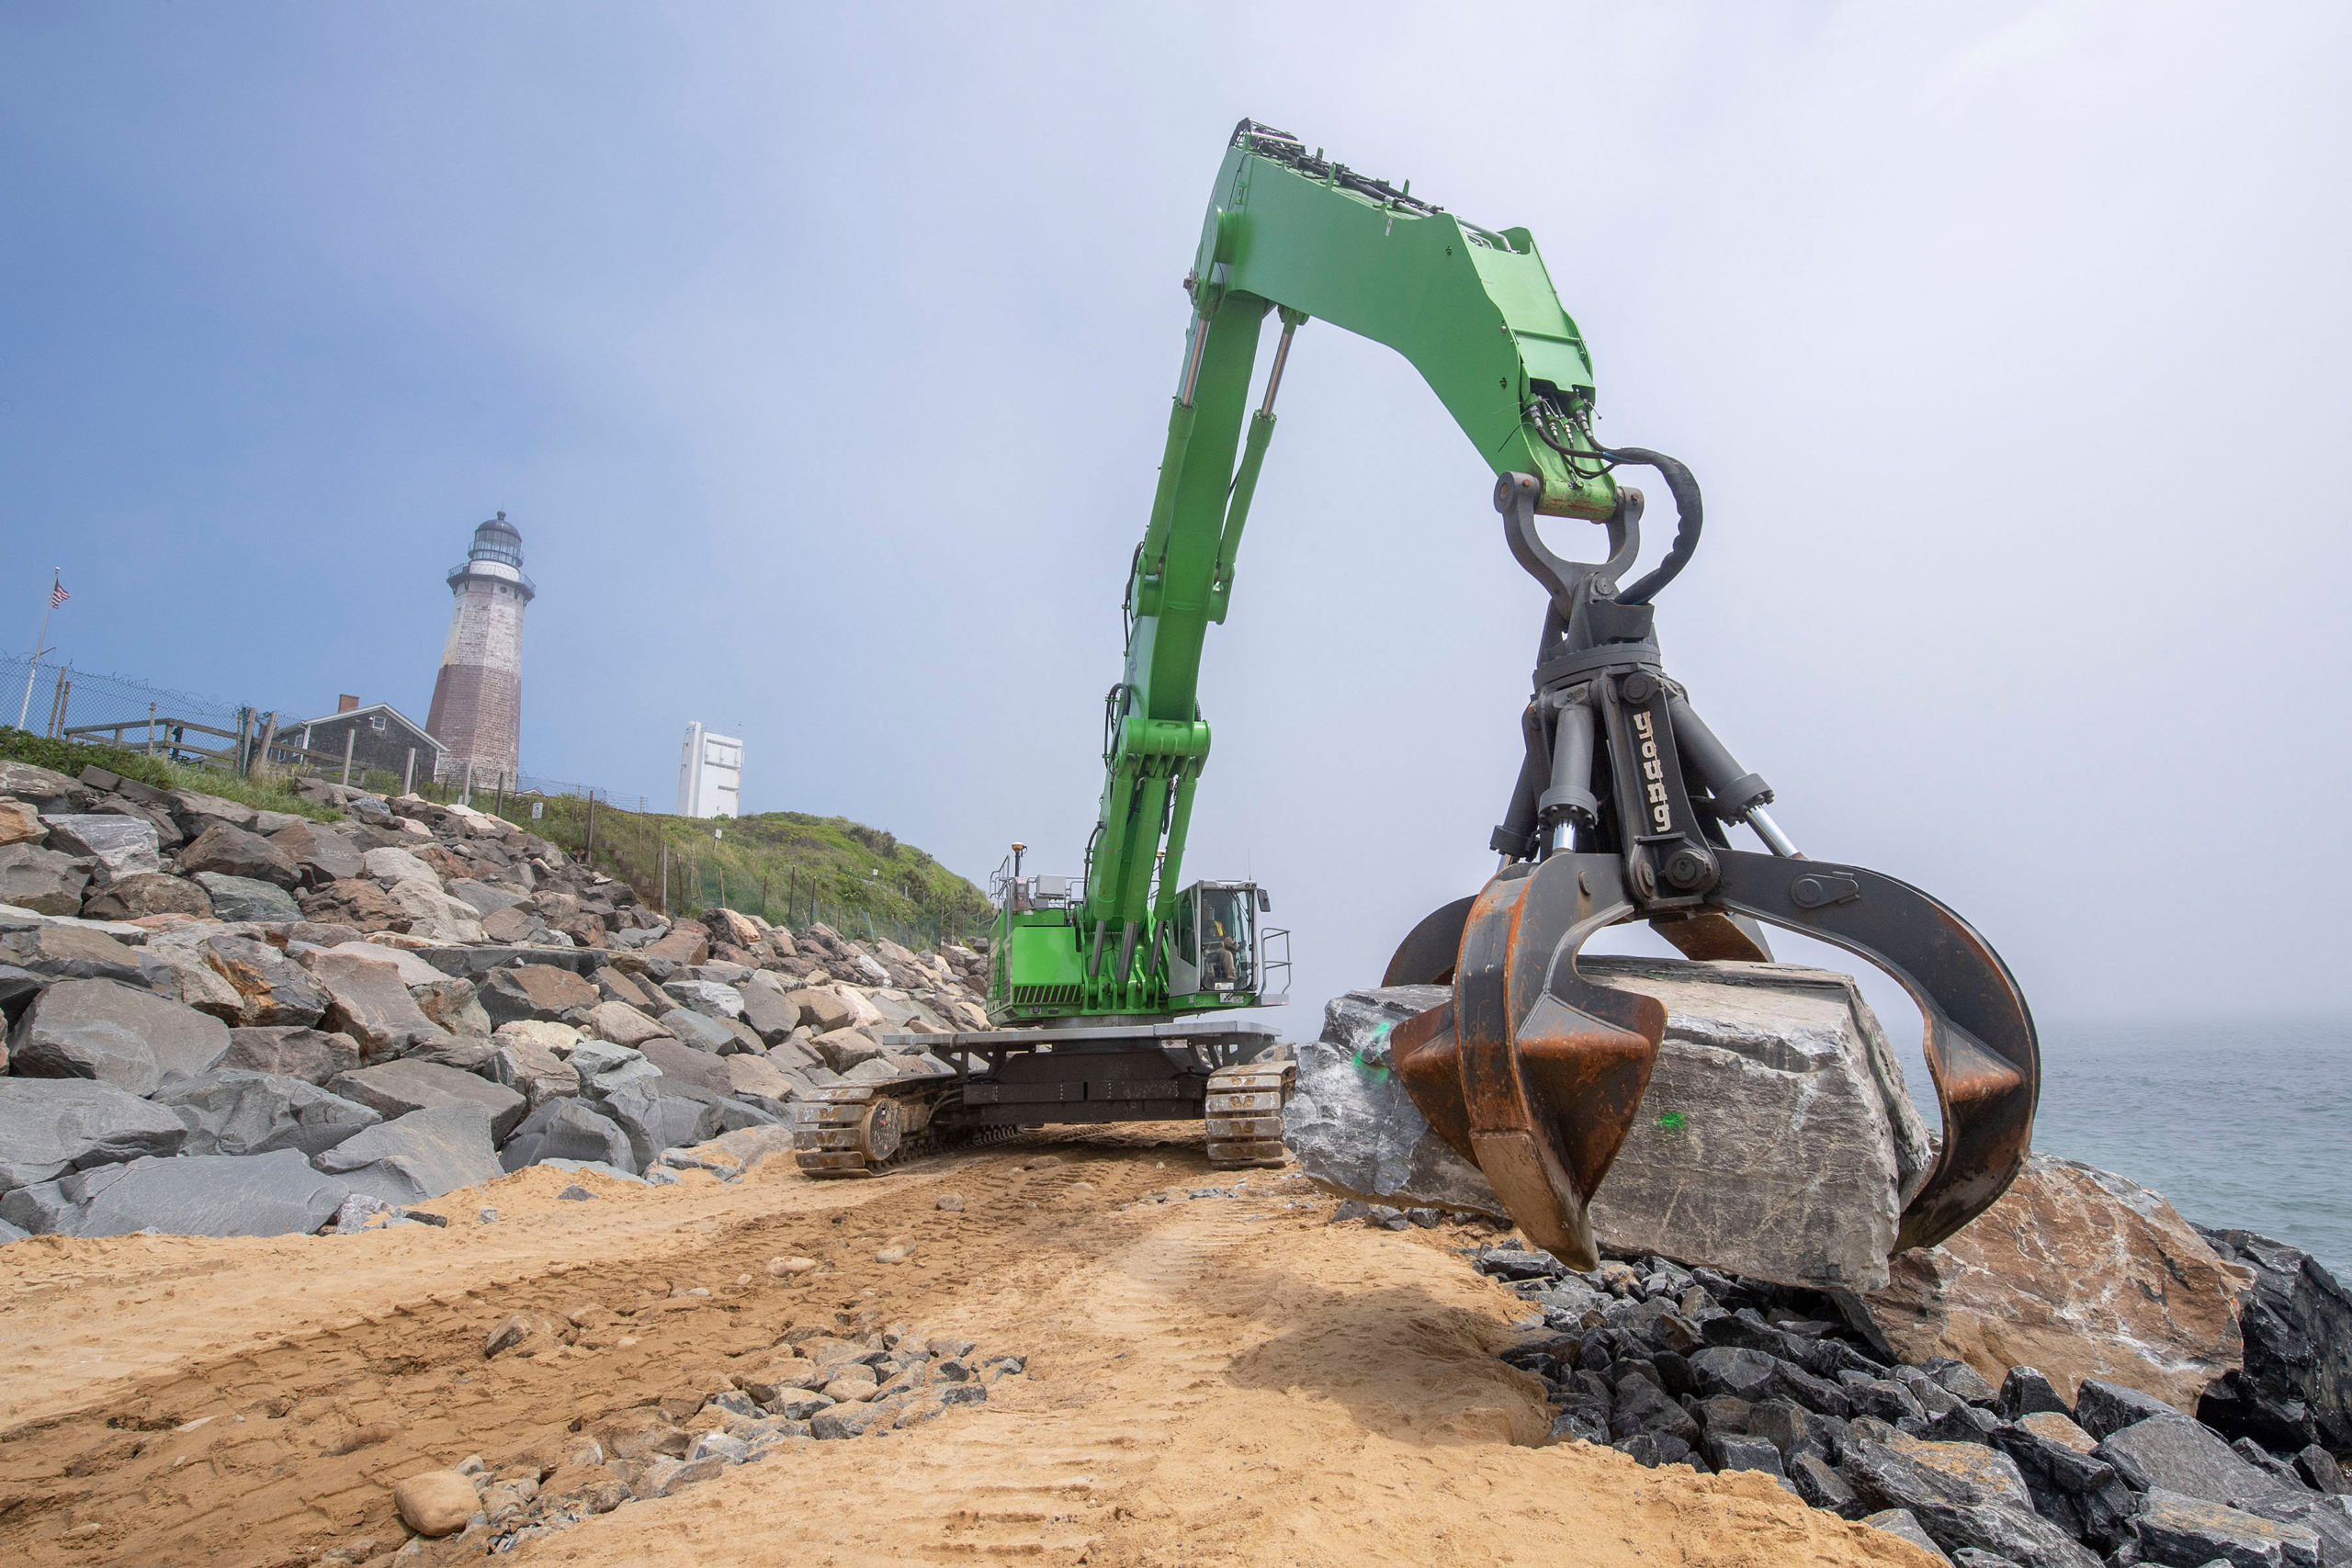 Large boulders - some as large as 15 tons - are moved by a large claw-tipped excavator after being transported from a quarry in upstate New York as part of the Army Corps of Engineers' Montauk Point Revetment Project on Monday.   MICHAEL HELLER